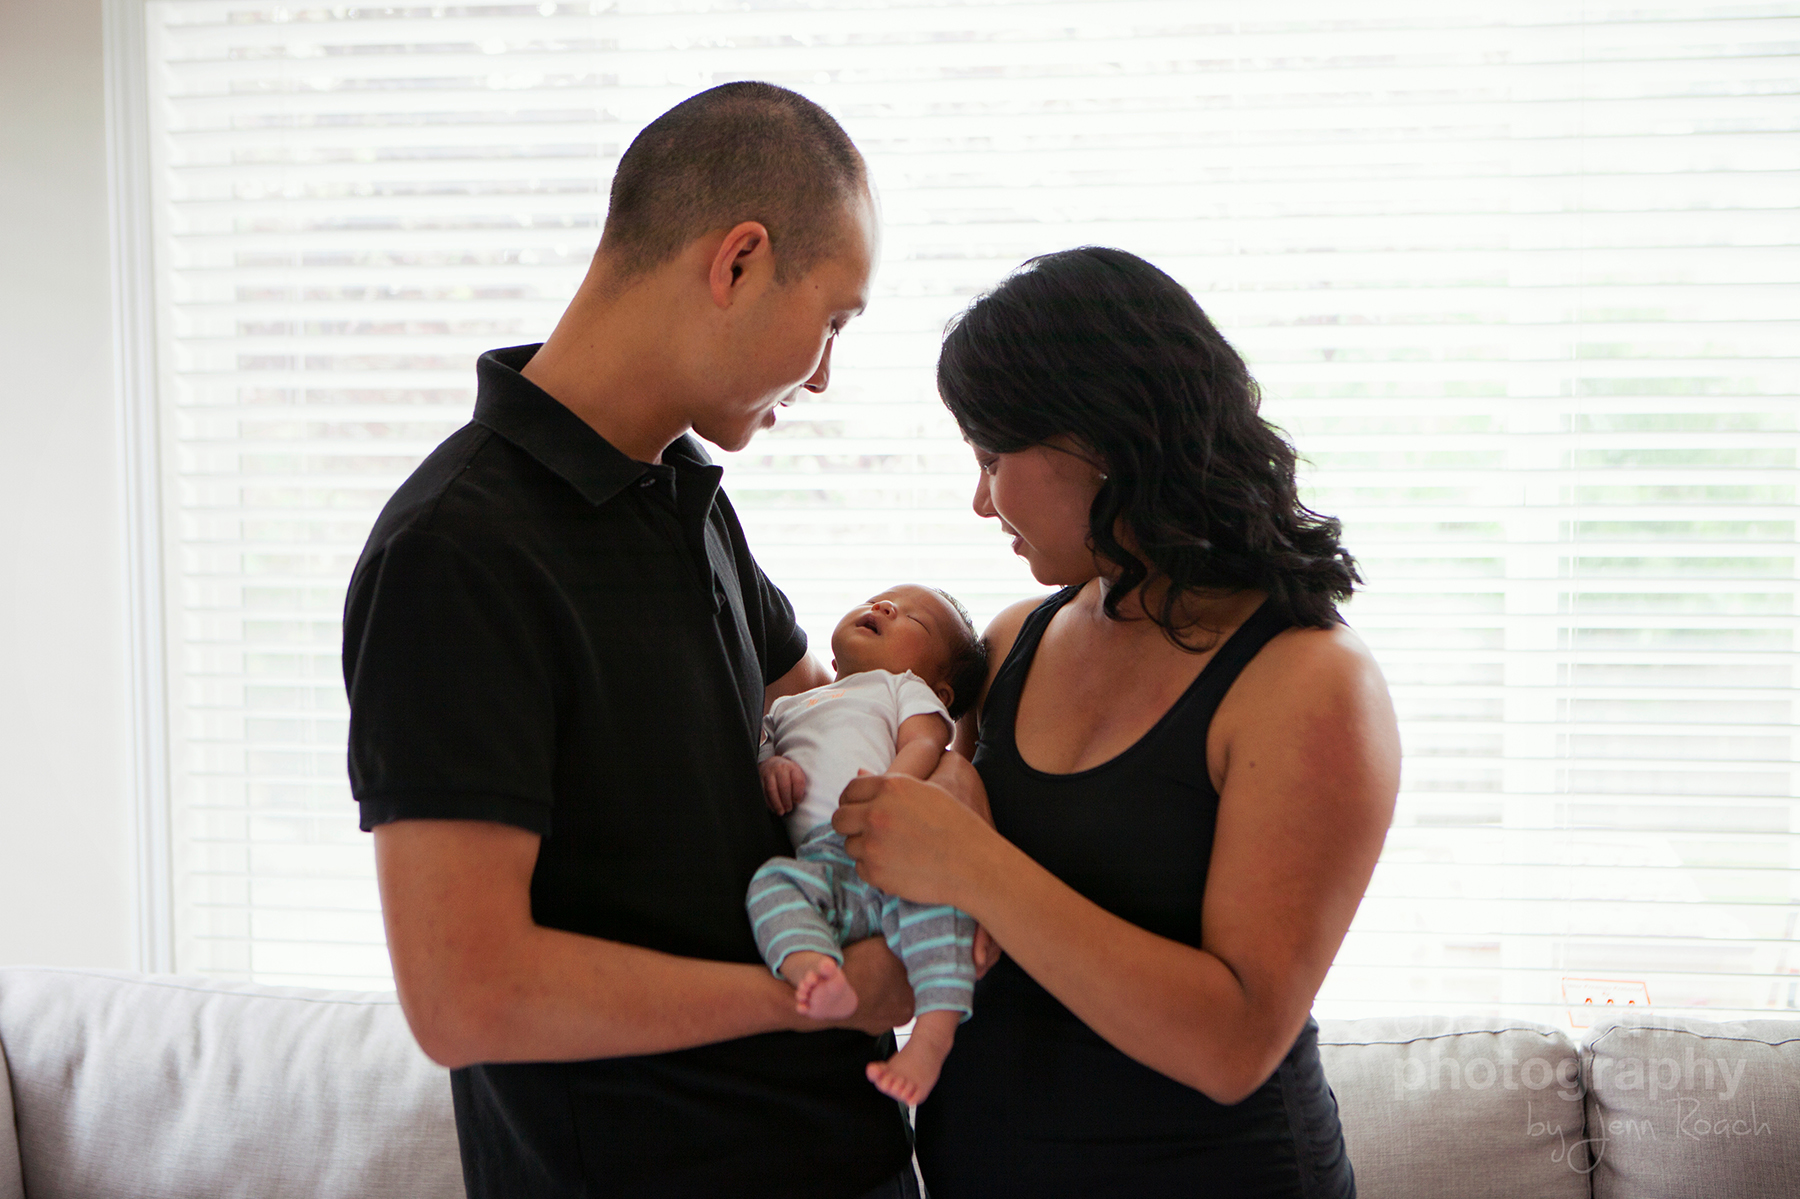 Candid and natural newborn photographer in Calgary